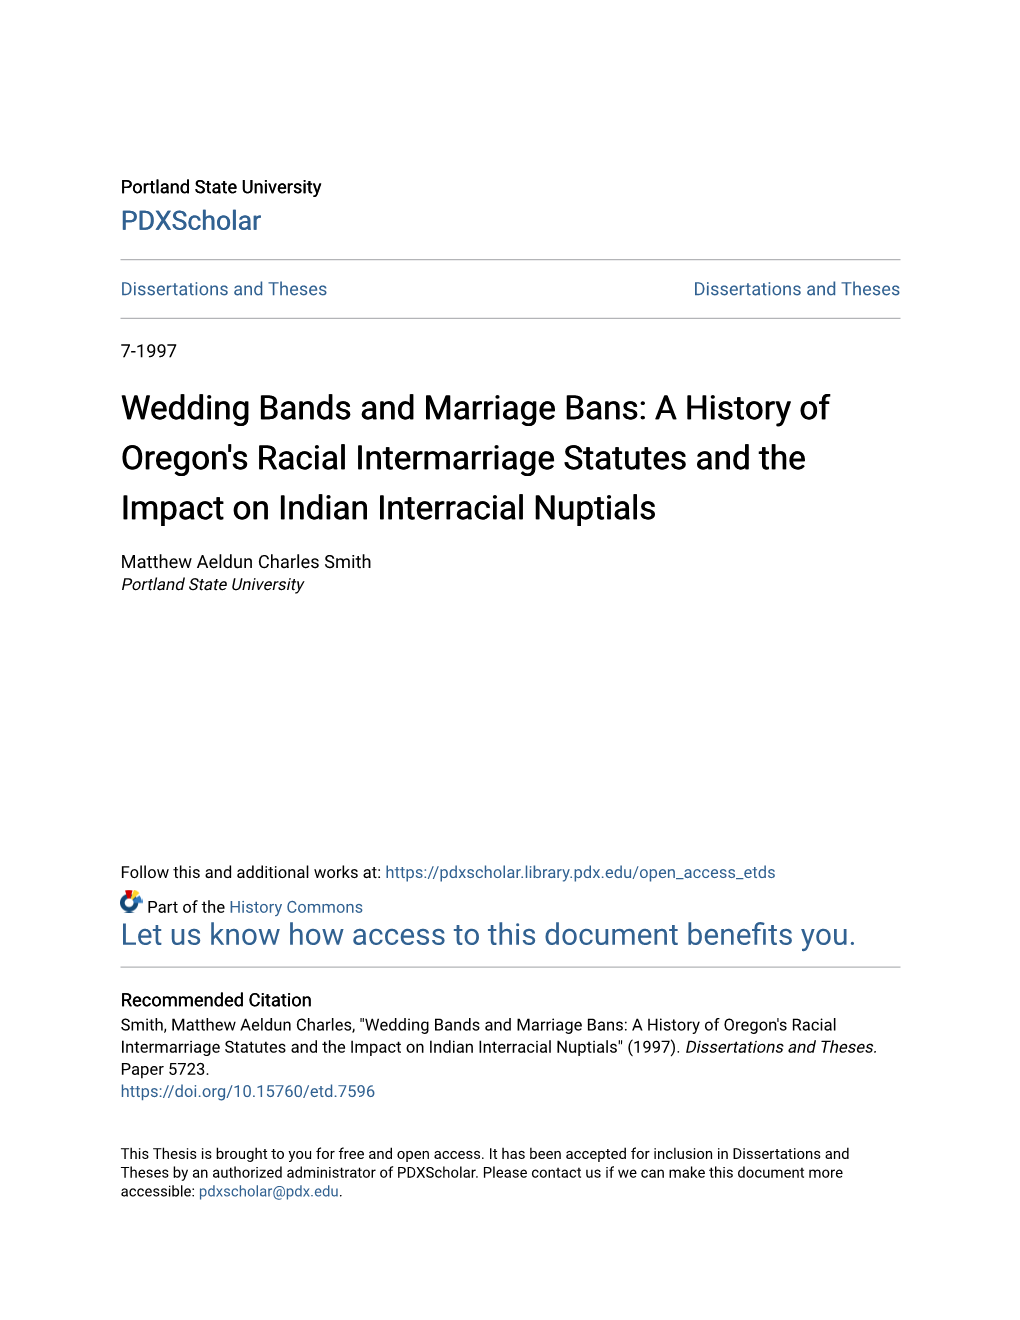 Wedding Bands and Marriage Bans: a History of Oregon's Racial Intermarriage Statutes and the Impact on Indian Interracial Nuptials